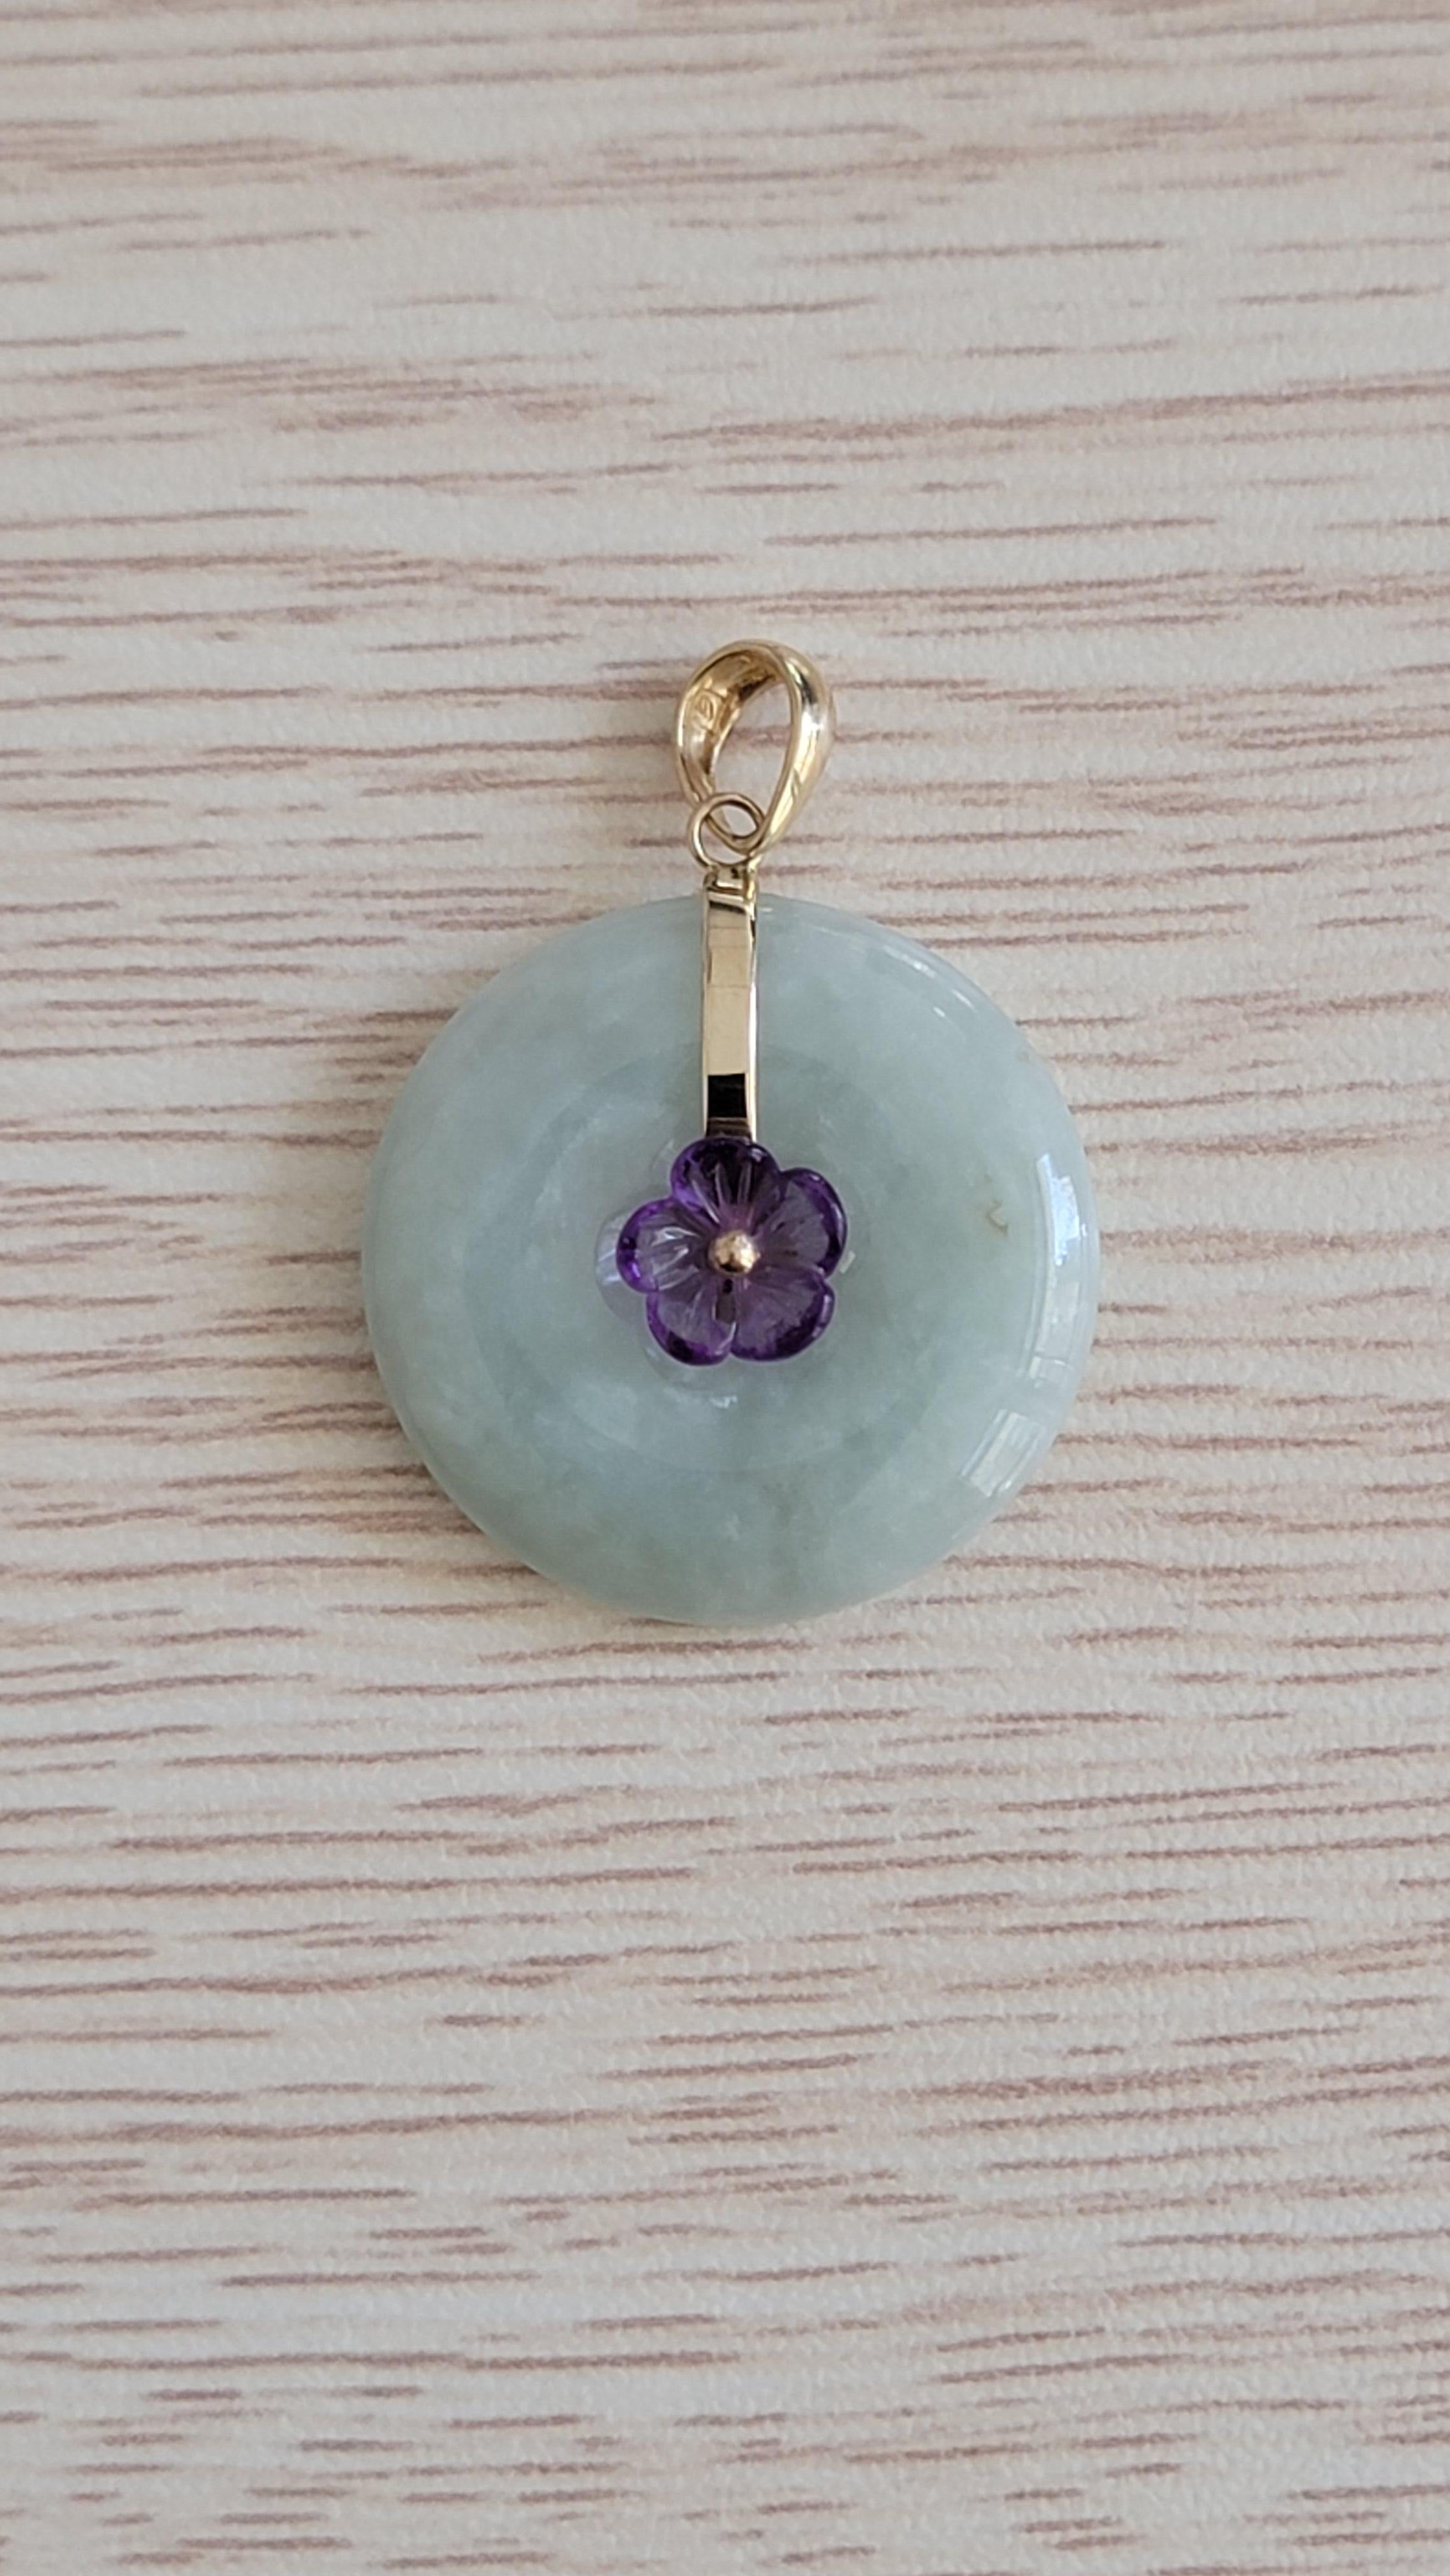 We used out classic Burmese A-Jadeite Donut shape, and put a carved Amethyst flower in the middle. The Jadeite and Amethyst interplay with their optics to bring out a bold and ravishing look. Using completely 100% untreated and natural handpicked